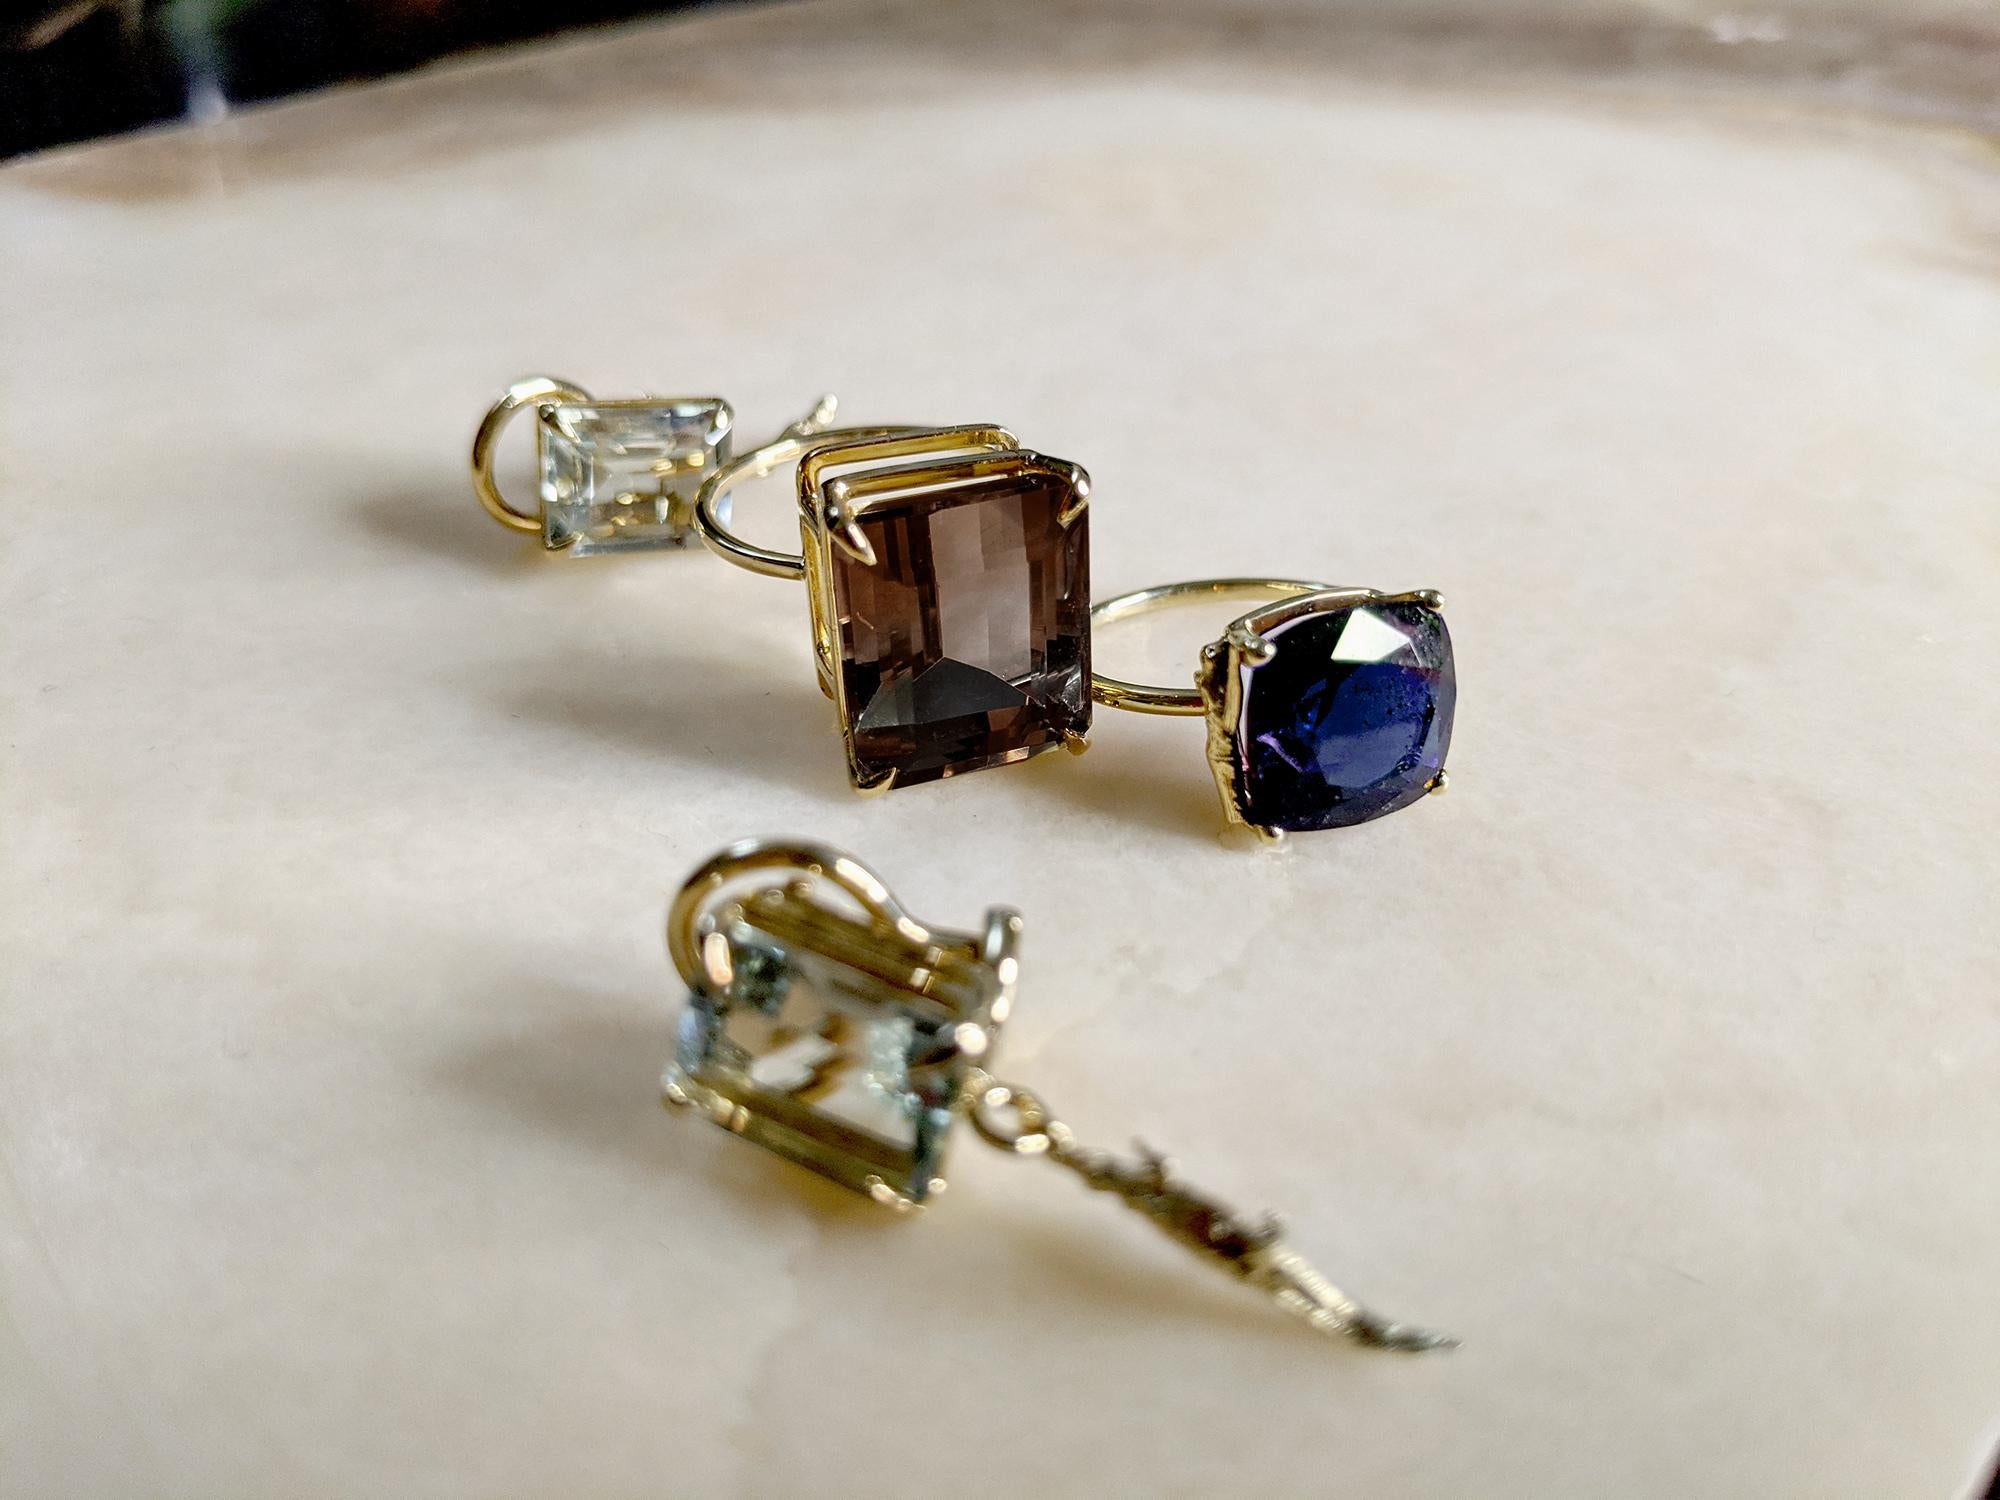 This contemporary ring is in 18 karat yellow gold with unheated natural antique sapphire, 8,73 carats, 11,9x10,3 mm. It belongs to Tea collection, which was featured in Vogue UA. 

The ring is easy to wear, and the gem catches eye's attention.